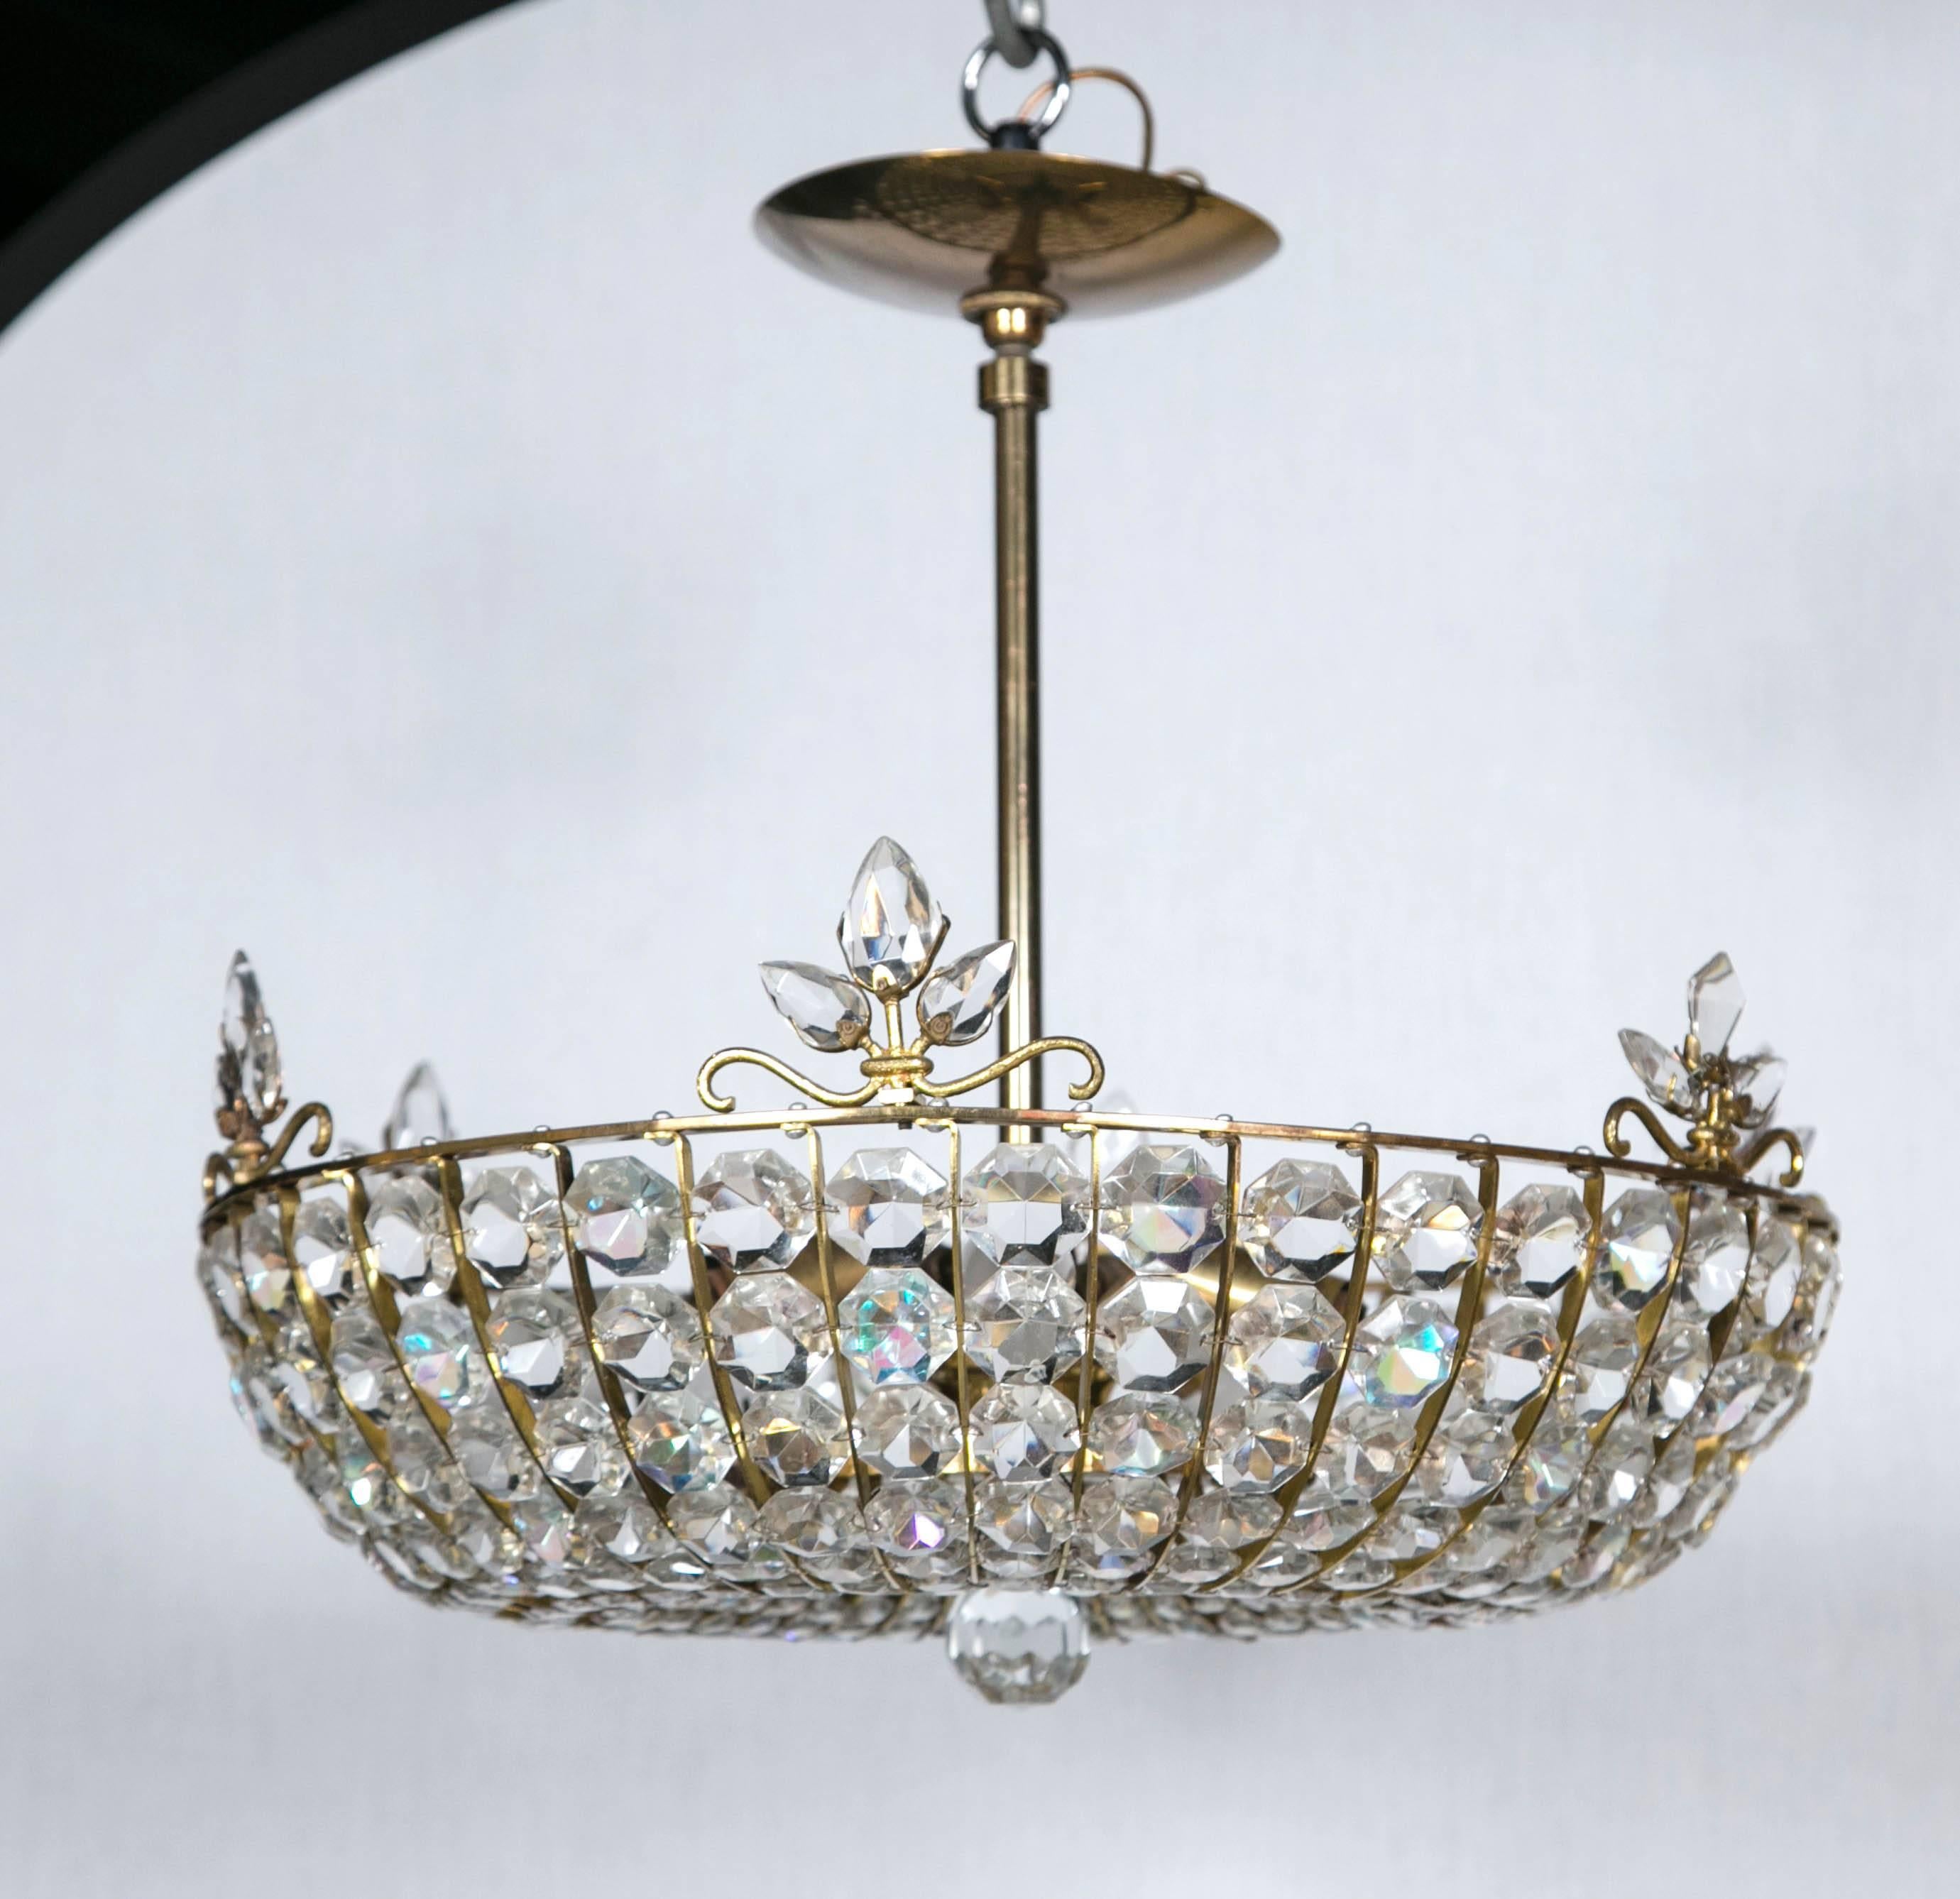 Circa 1930's French beaded crystal light fixture with interior lights inset.